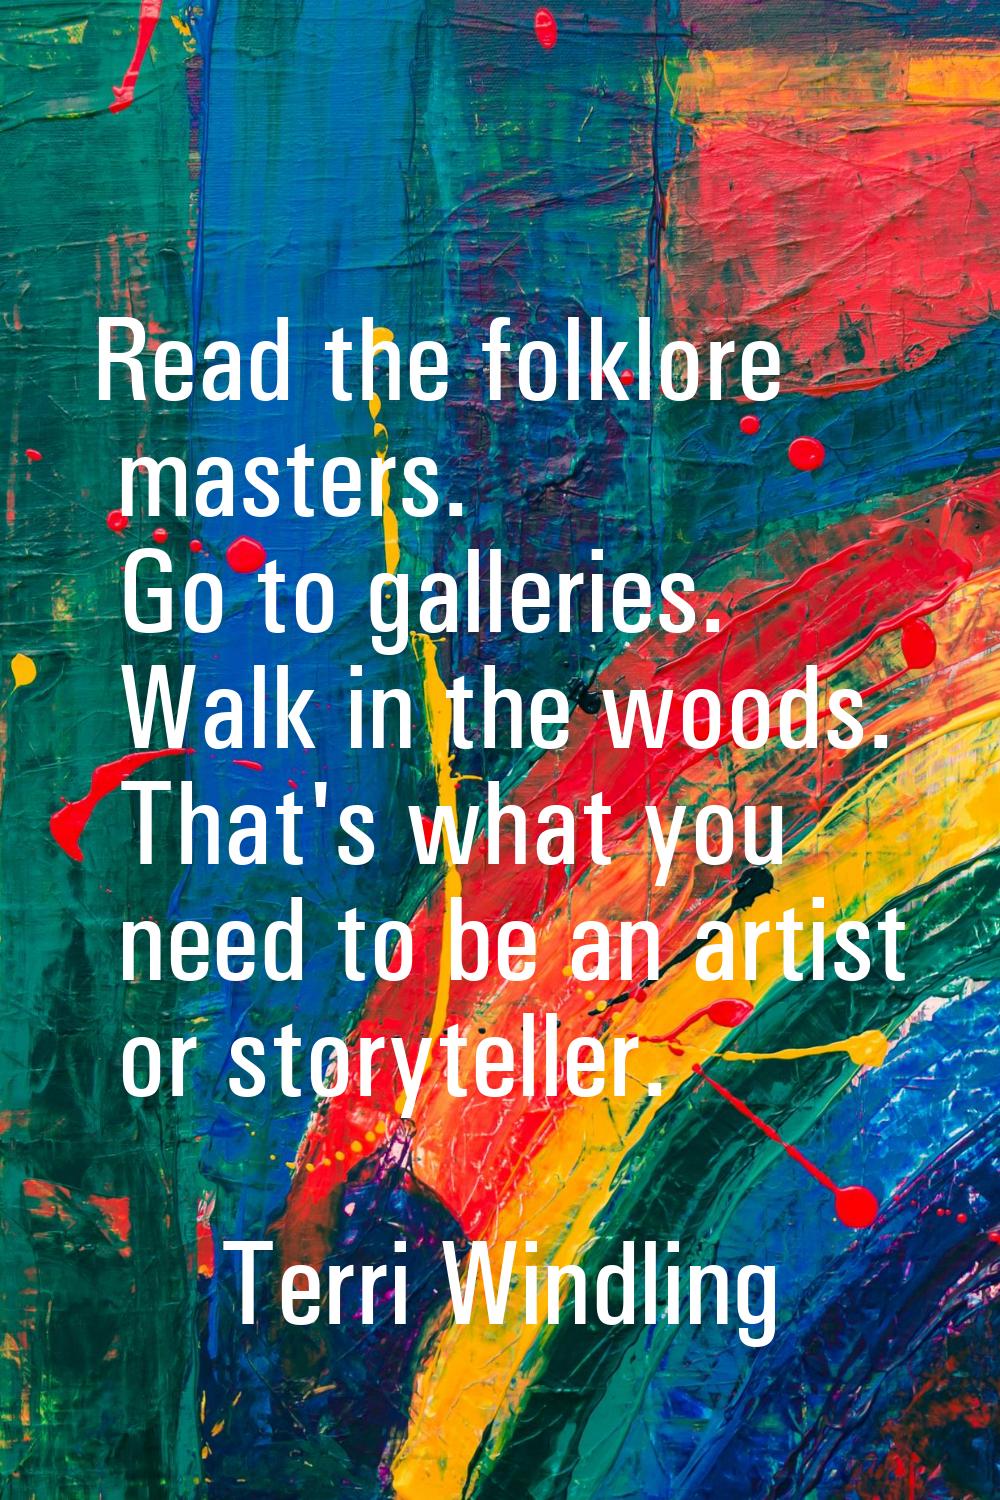 Read the folklore masters. Go to galleries. Walk in the woods. That's what you need to be an artist